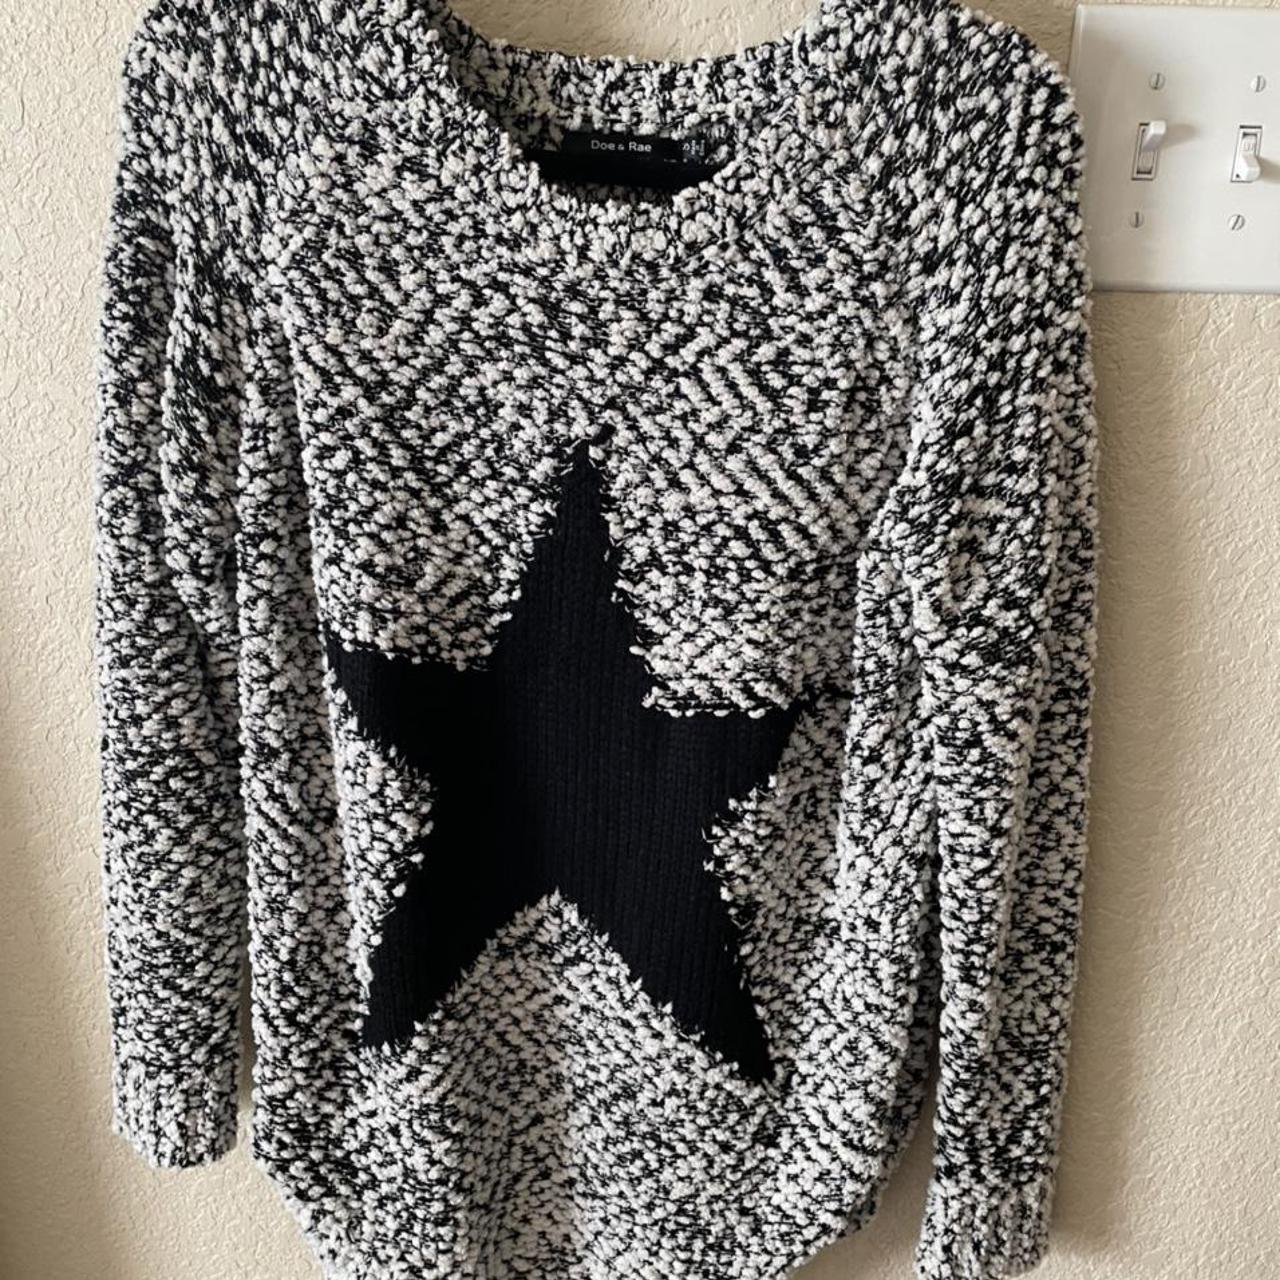 Product Image 1 - Fluffy oversized sweater
Never worn! No